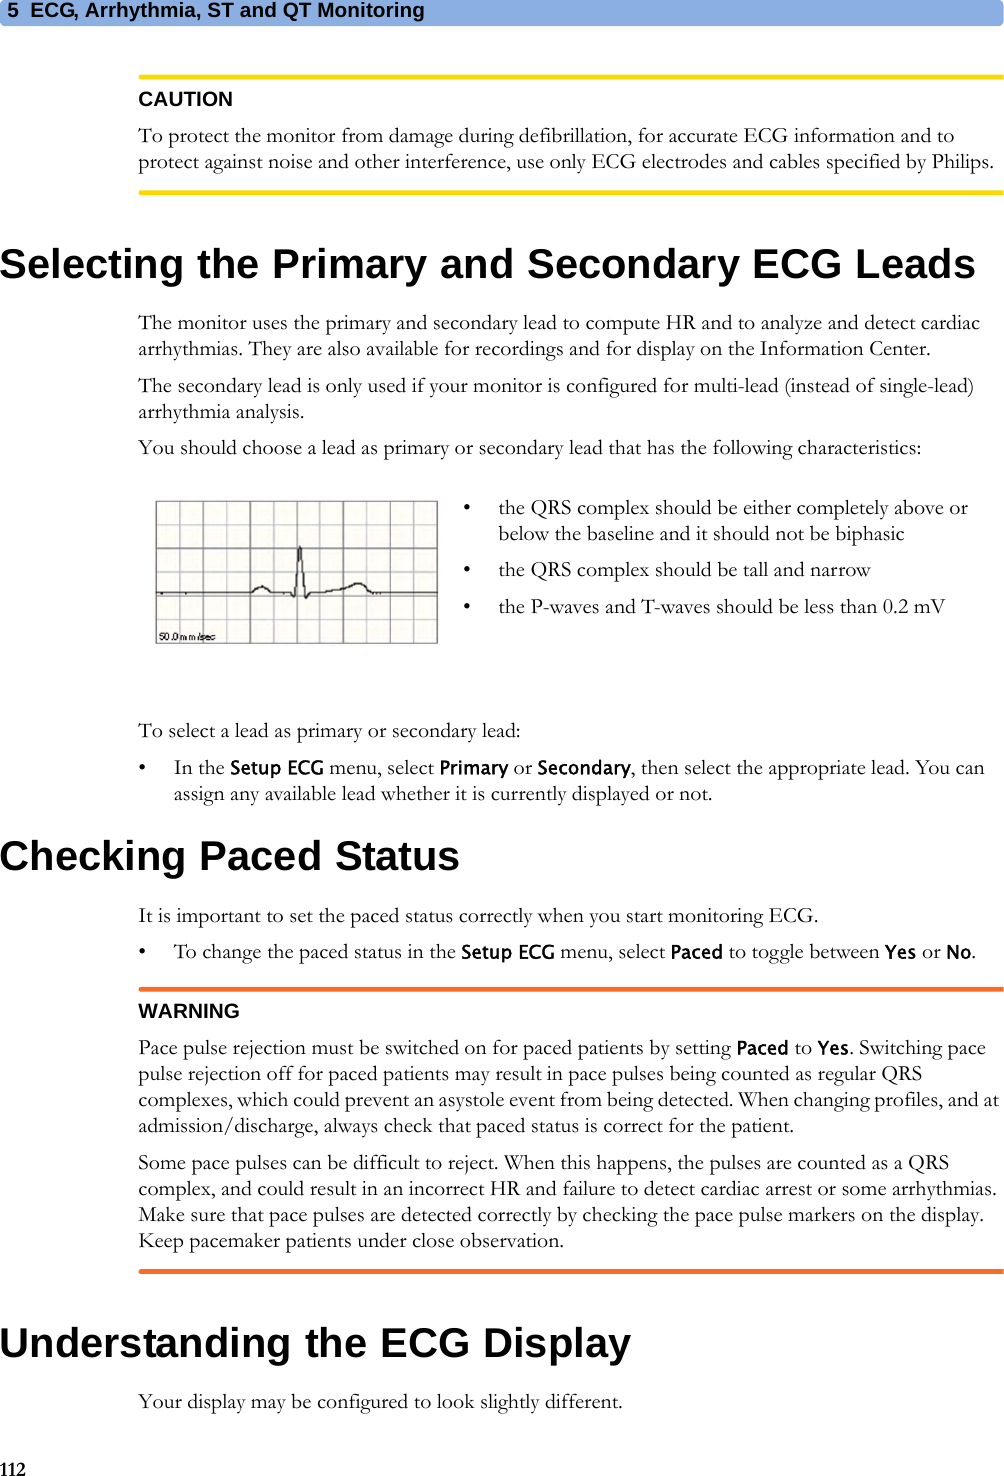 5 ECG, Arrhythmia, ST and QT Monitoring112CAUTIONTo protect the monitor from damage during defibrillation, for accurate ECG information and to protect against noise and other interference, use only ECG electrodes and cables specified by Philips.Selecting the Primary and Secondary ECG LeadsThe monitor uses the primary and secondary lead to compute HR and to analyze and detect cardiac arrhythmias. They are also available for recordings and for display on the Information Center.The secondary lead is only used if your monitor is configured for multi-lead (instead of single-lead) arrhythmia analysis.You should choose a lead as primary or secondary lead that has the following characteristics:To select a lead as primary or secondary lead:•In the Setup ECG menu, select Primary or Secondary, then select the appropriate lead. You can assign any available lead whether it is currently displayed or not.Checking Paced StatusIt is important to set the paced status correctly when you start monitoring ECG.• To change the paced status in the Setup ECG menu, select Paced to toggle between Yes or No.WARNINGPace pulse rejection must be switched on for paced patients by setting Paced to Yes. Switching pace pulse rejection off for paced patients may result in pace pulses being counted as regular QRS complexes, which could prevent an asystole event from being detected. When changing profiles, and at admission/discharge, always check that paced status is correct for the patient.Some pace pulses can be difficult to reject. When this happens, the pulses are counted as a QRS complex, and could result in an incorrect HR and failure to detect cardiac arrest or some arrhythmias. Make sure that pace pulses are detected correctly by checking the pace pulse markers on the display. Keep pacemaker patients under close observation.Understanding the ECG DisplayYour display may be configured to look slightly different.• the QRS complex should be either completely above or below the baseline and it should not be biphasic• the QRS complex should be tall and narrow• the P-waves and T-waves should be less than 0.2 mV